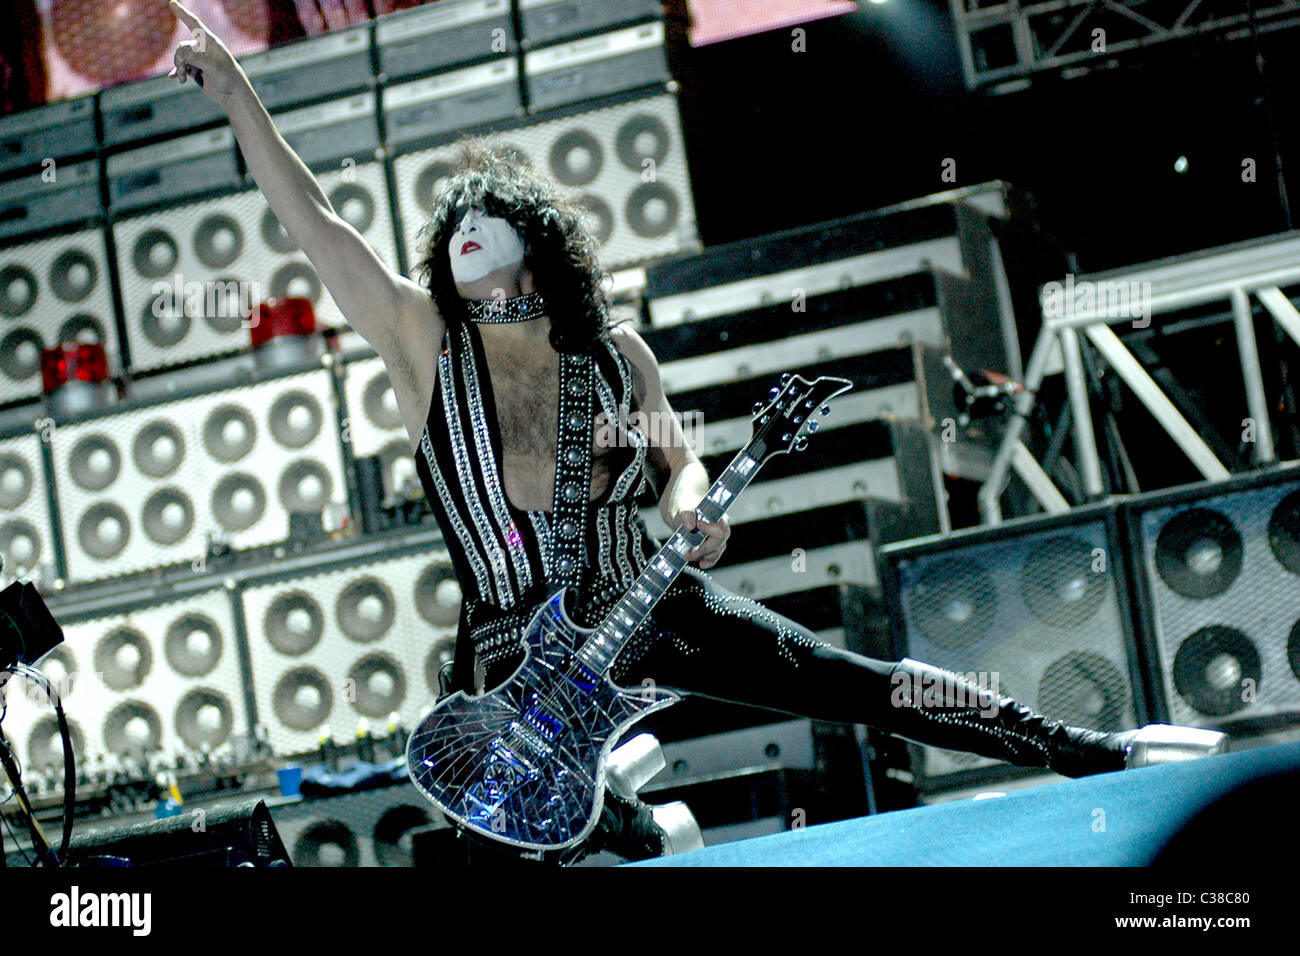 Kiss  in concert at the Quilmes Rock Festival 2009 Buenos Aires, Argentina - 05.04.09 .com Stock Photo